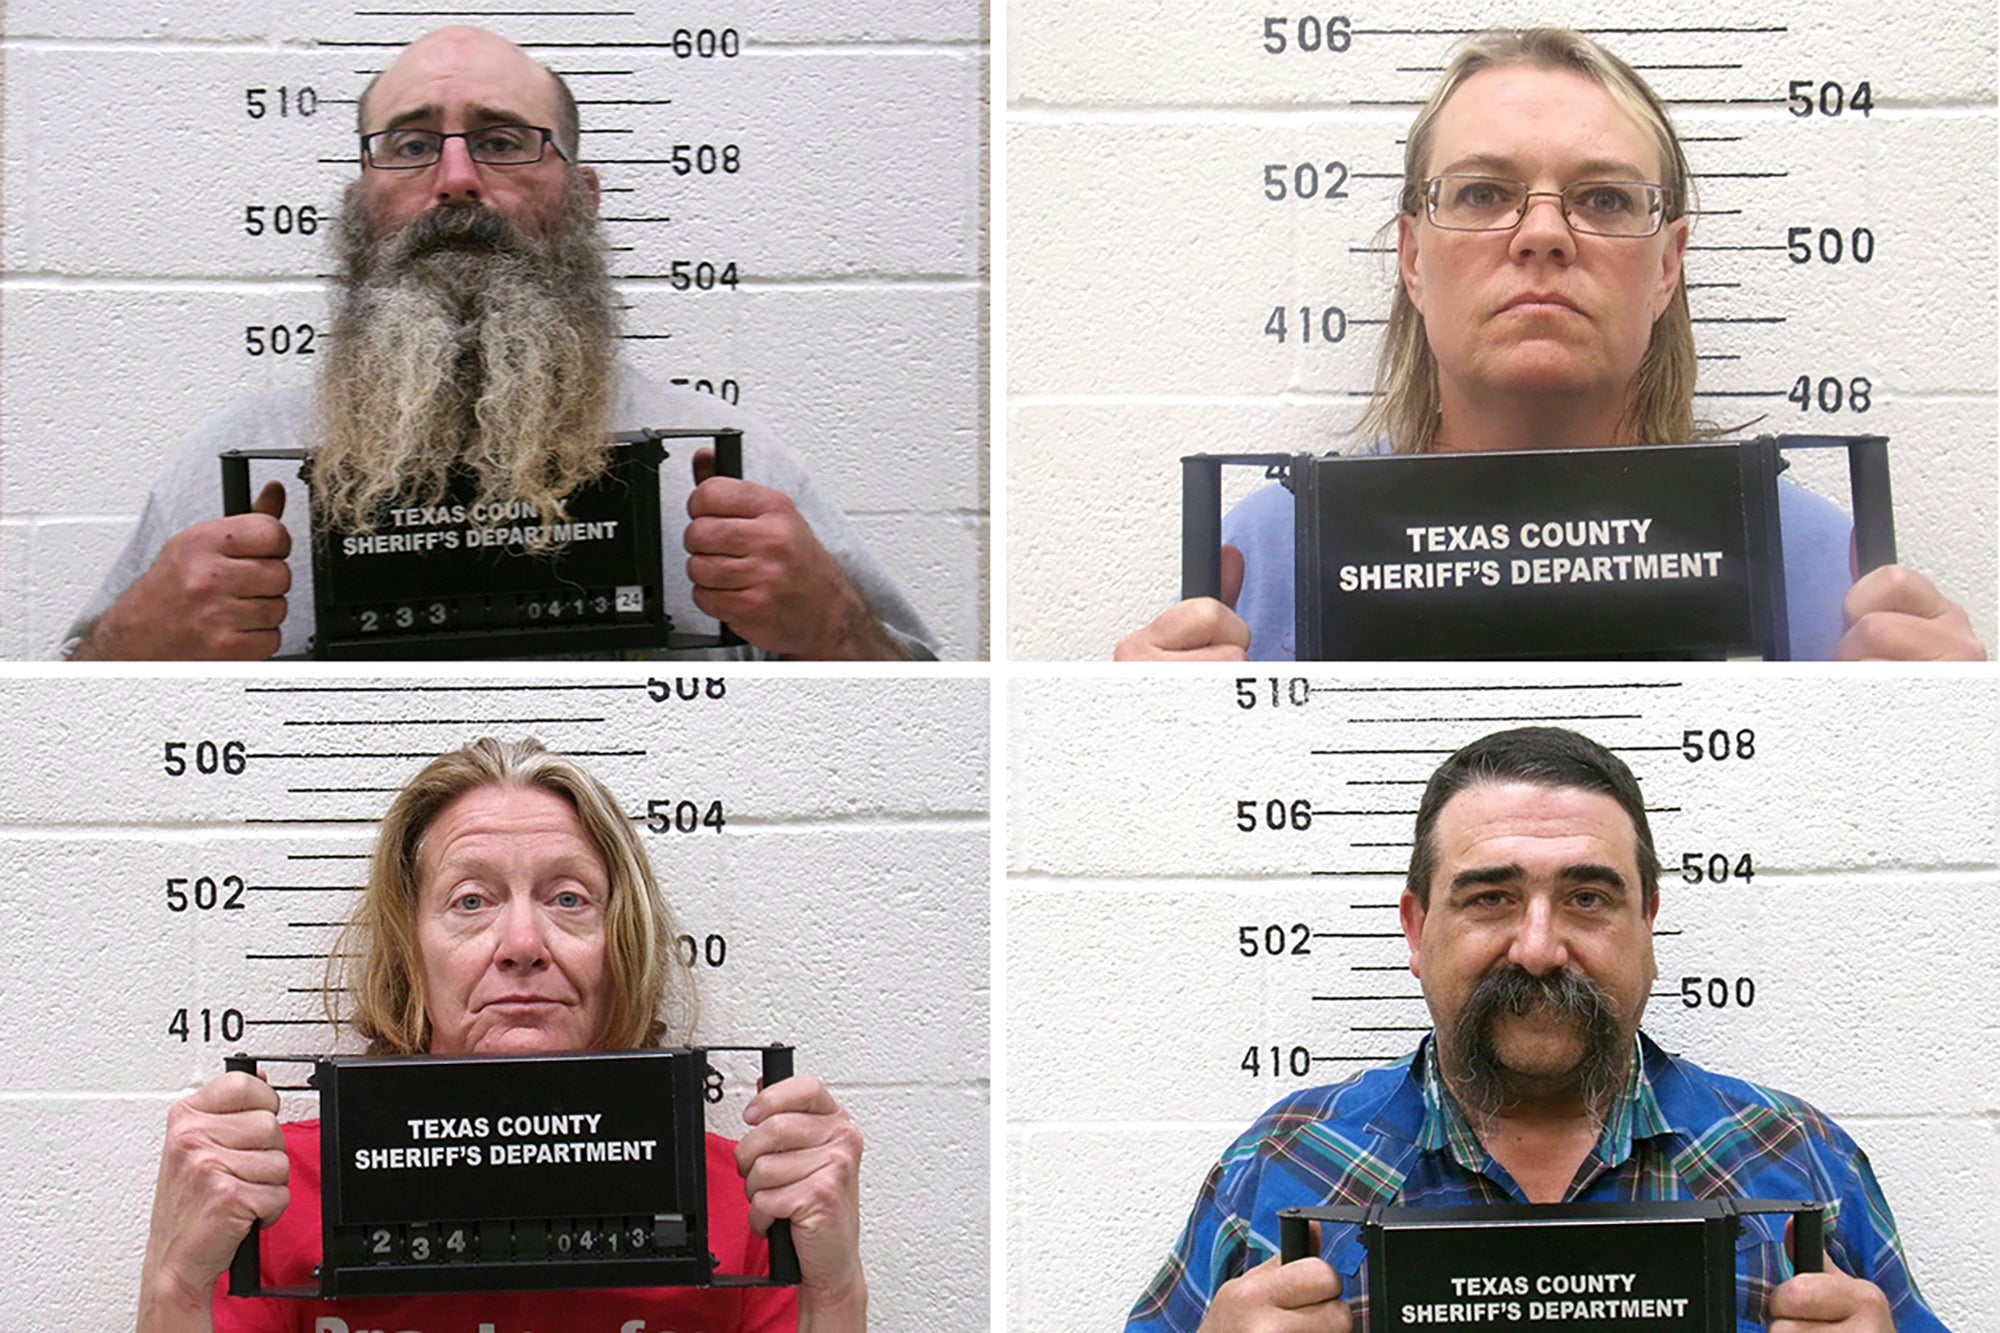 Tad Bert Cullum, top left, Cora Twombly, top right, Tifany Machel Adams, bottom left, and Cole Earl Twombly, bottom right, were arrested on 13 April in the murder and kidnapping Veronica Butler and Jilian Kelley